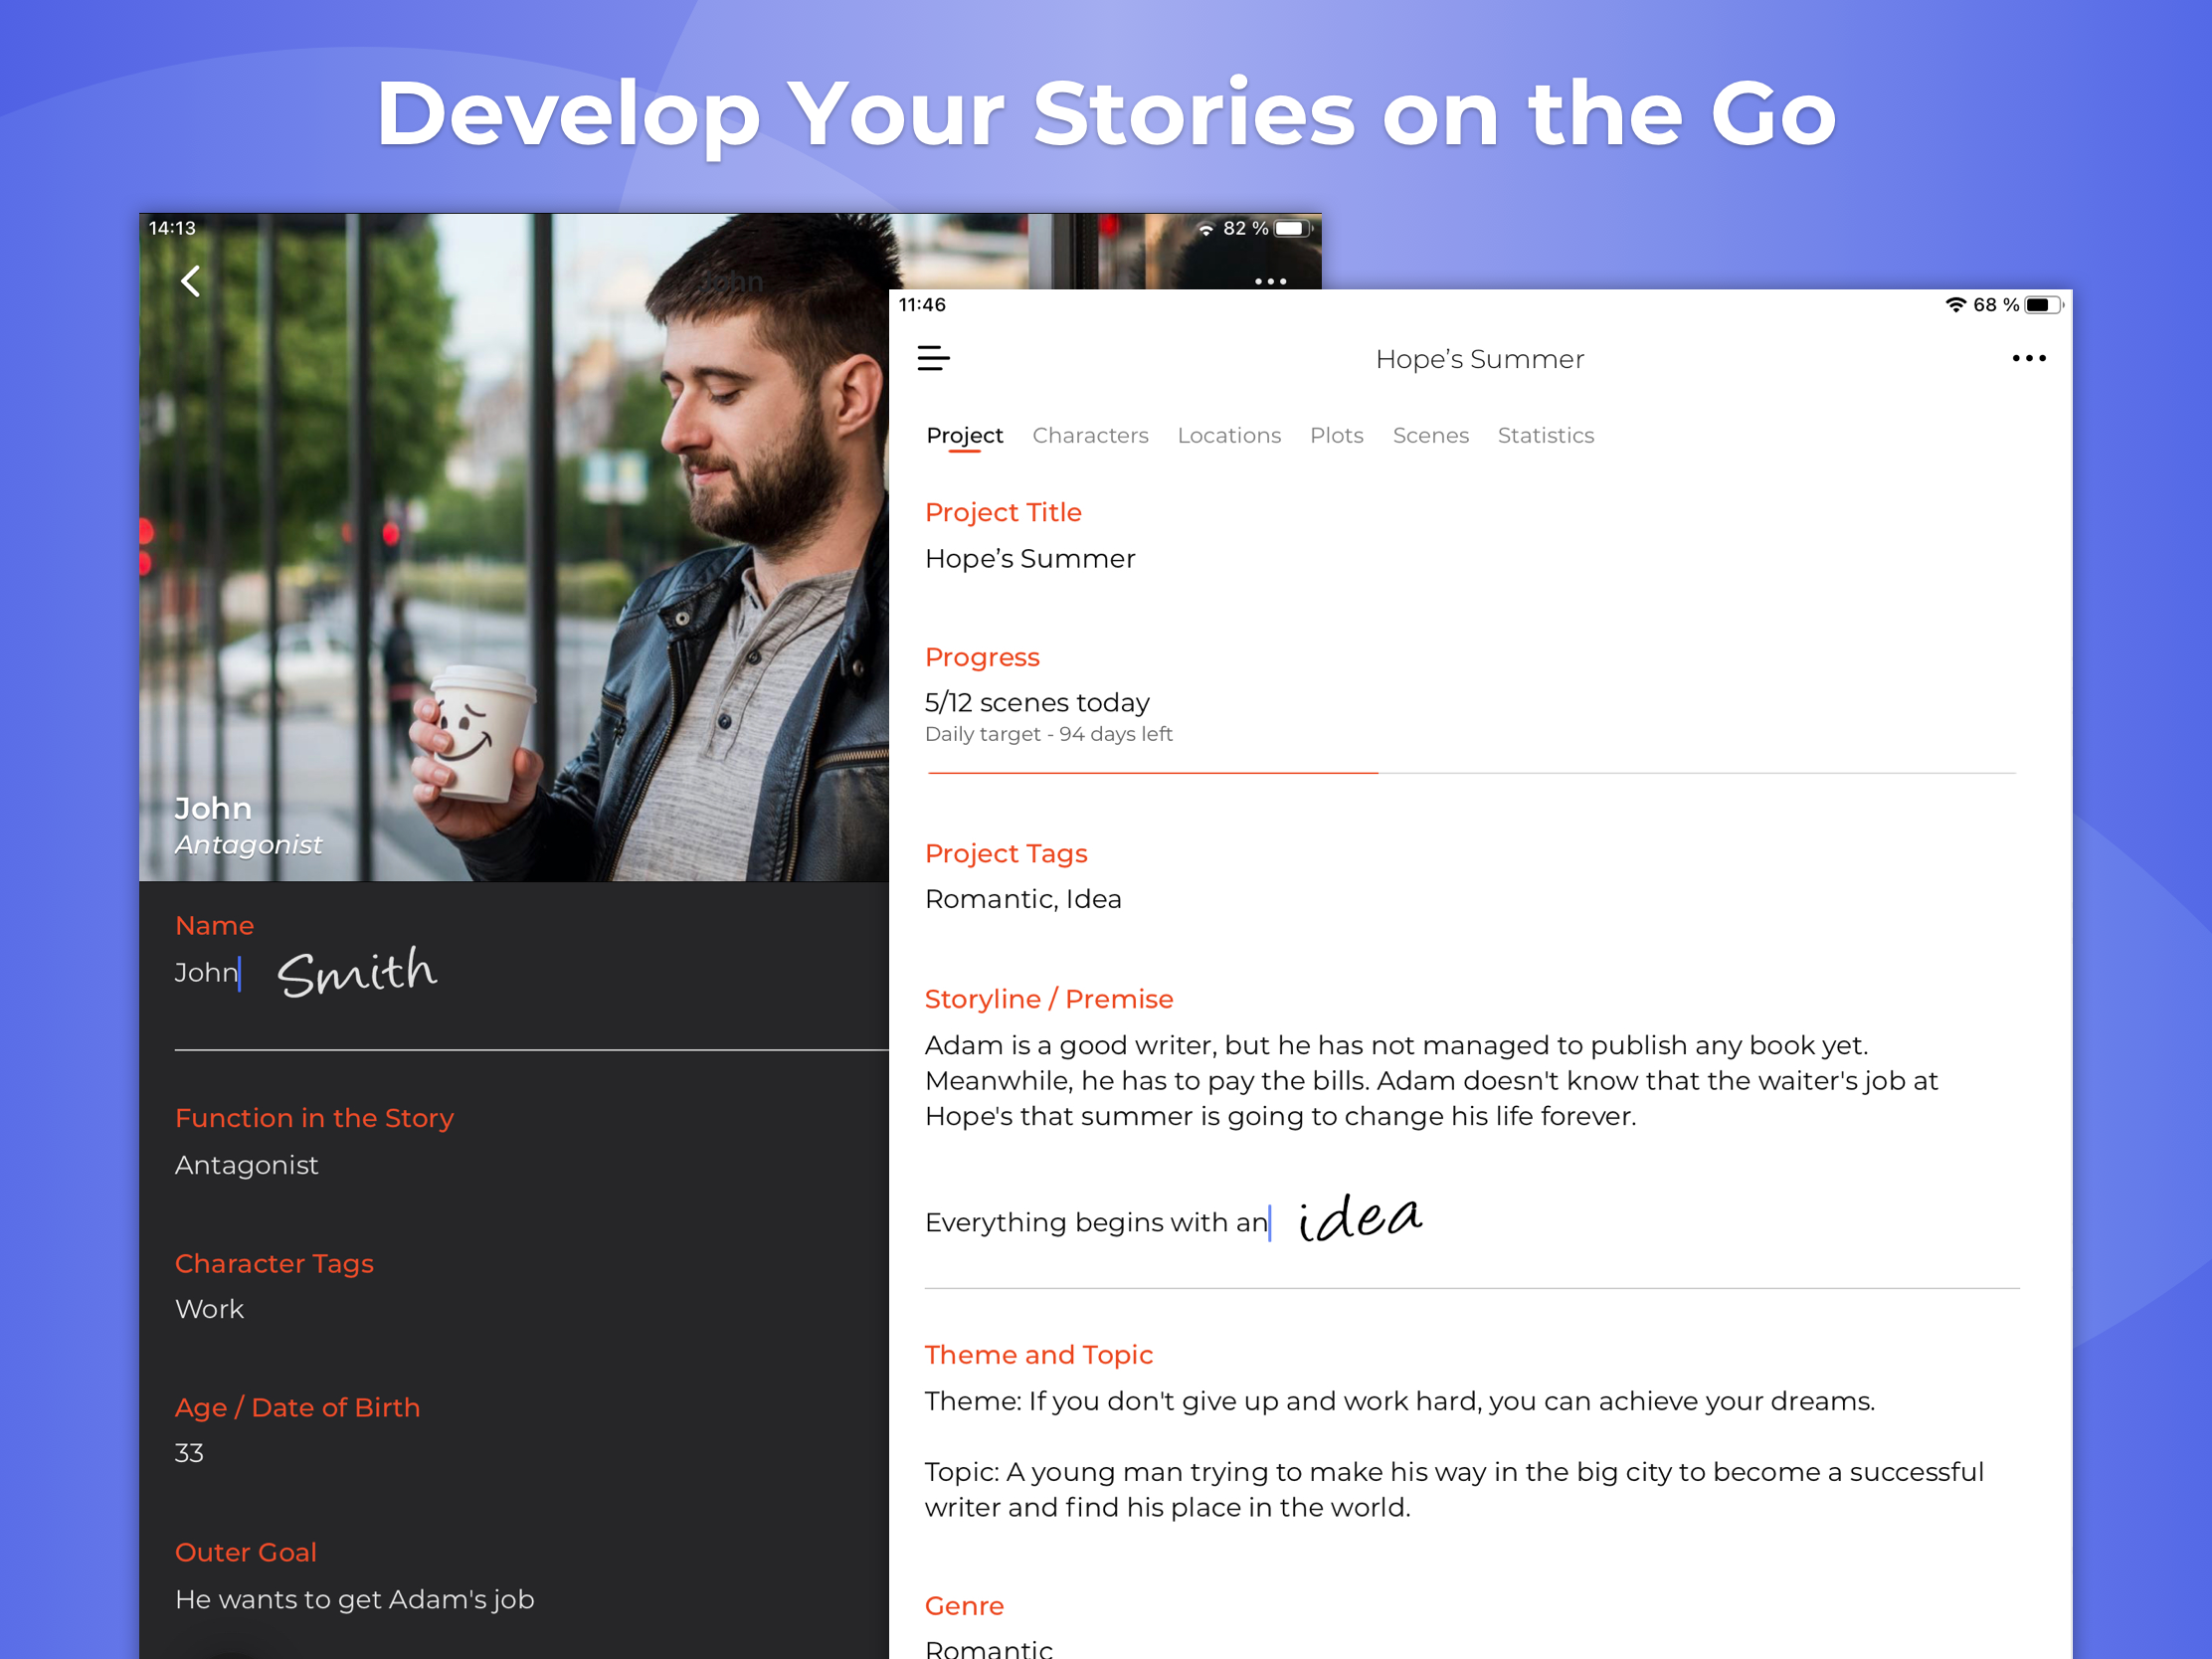 Plan your stories on the go with Story Planner